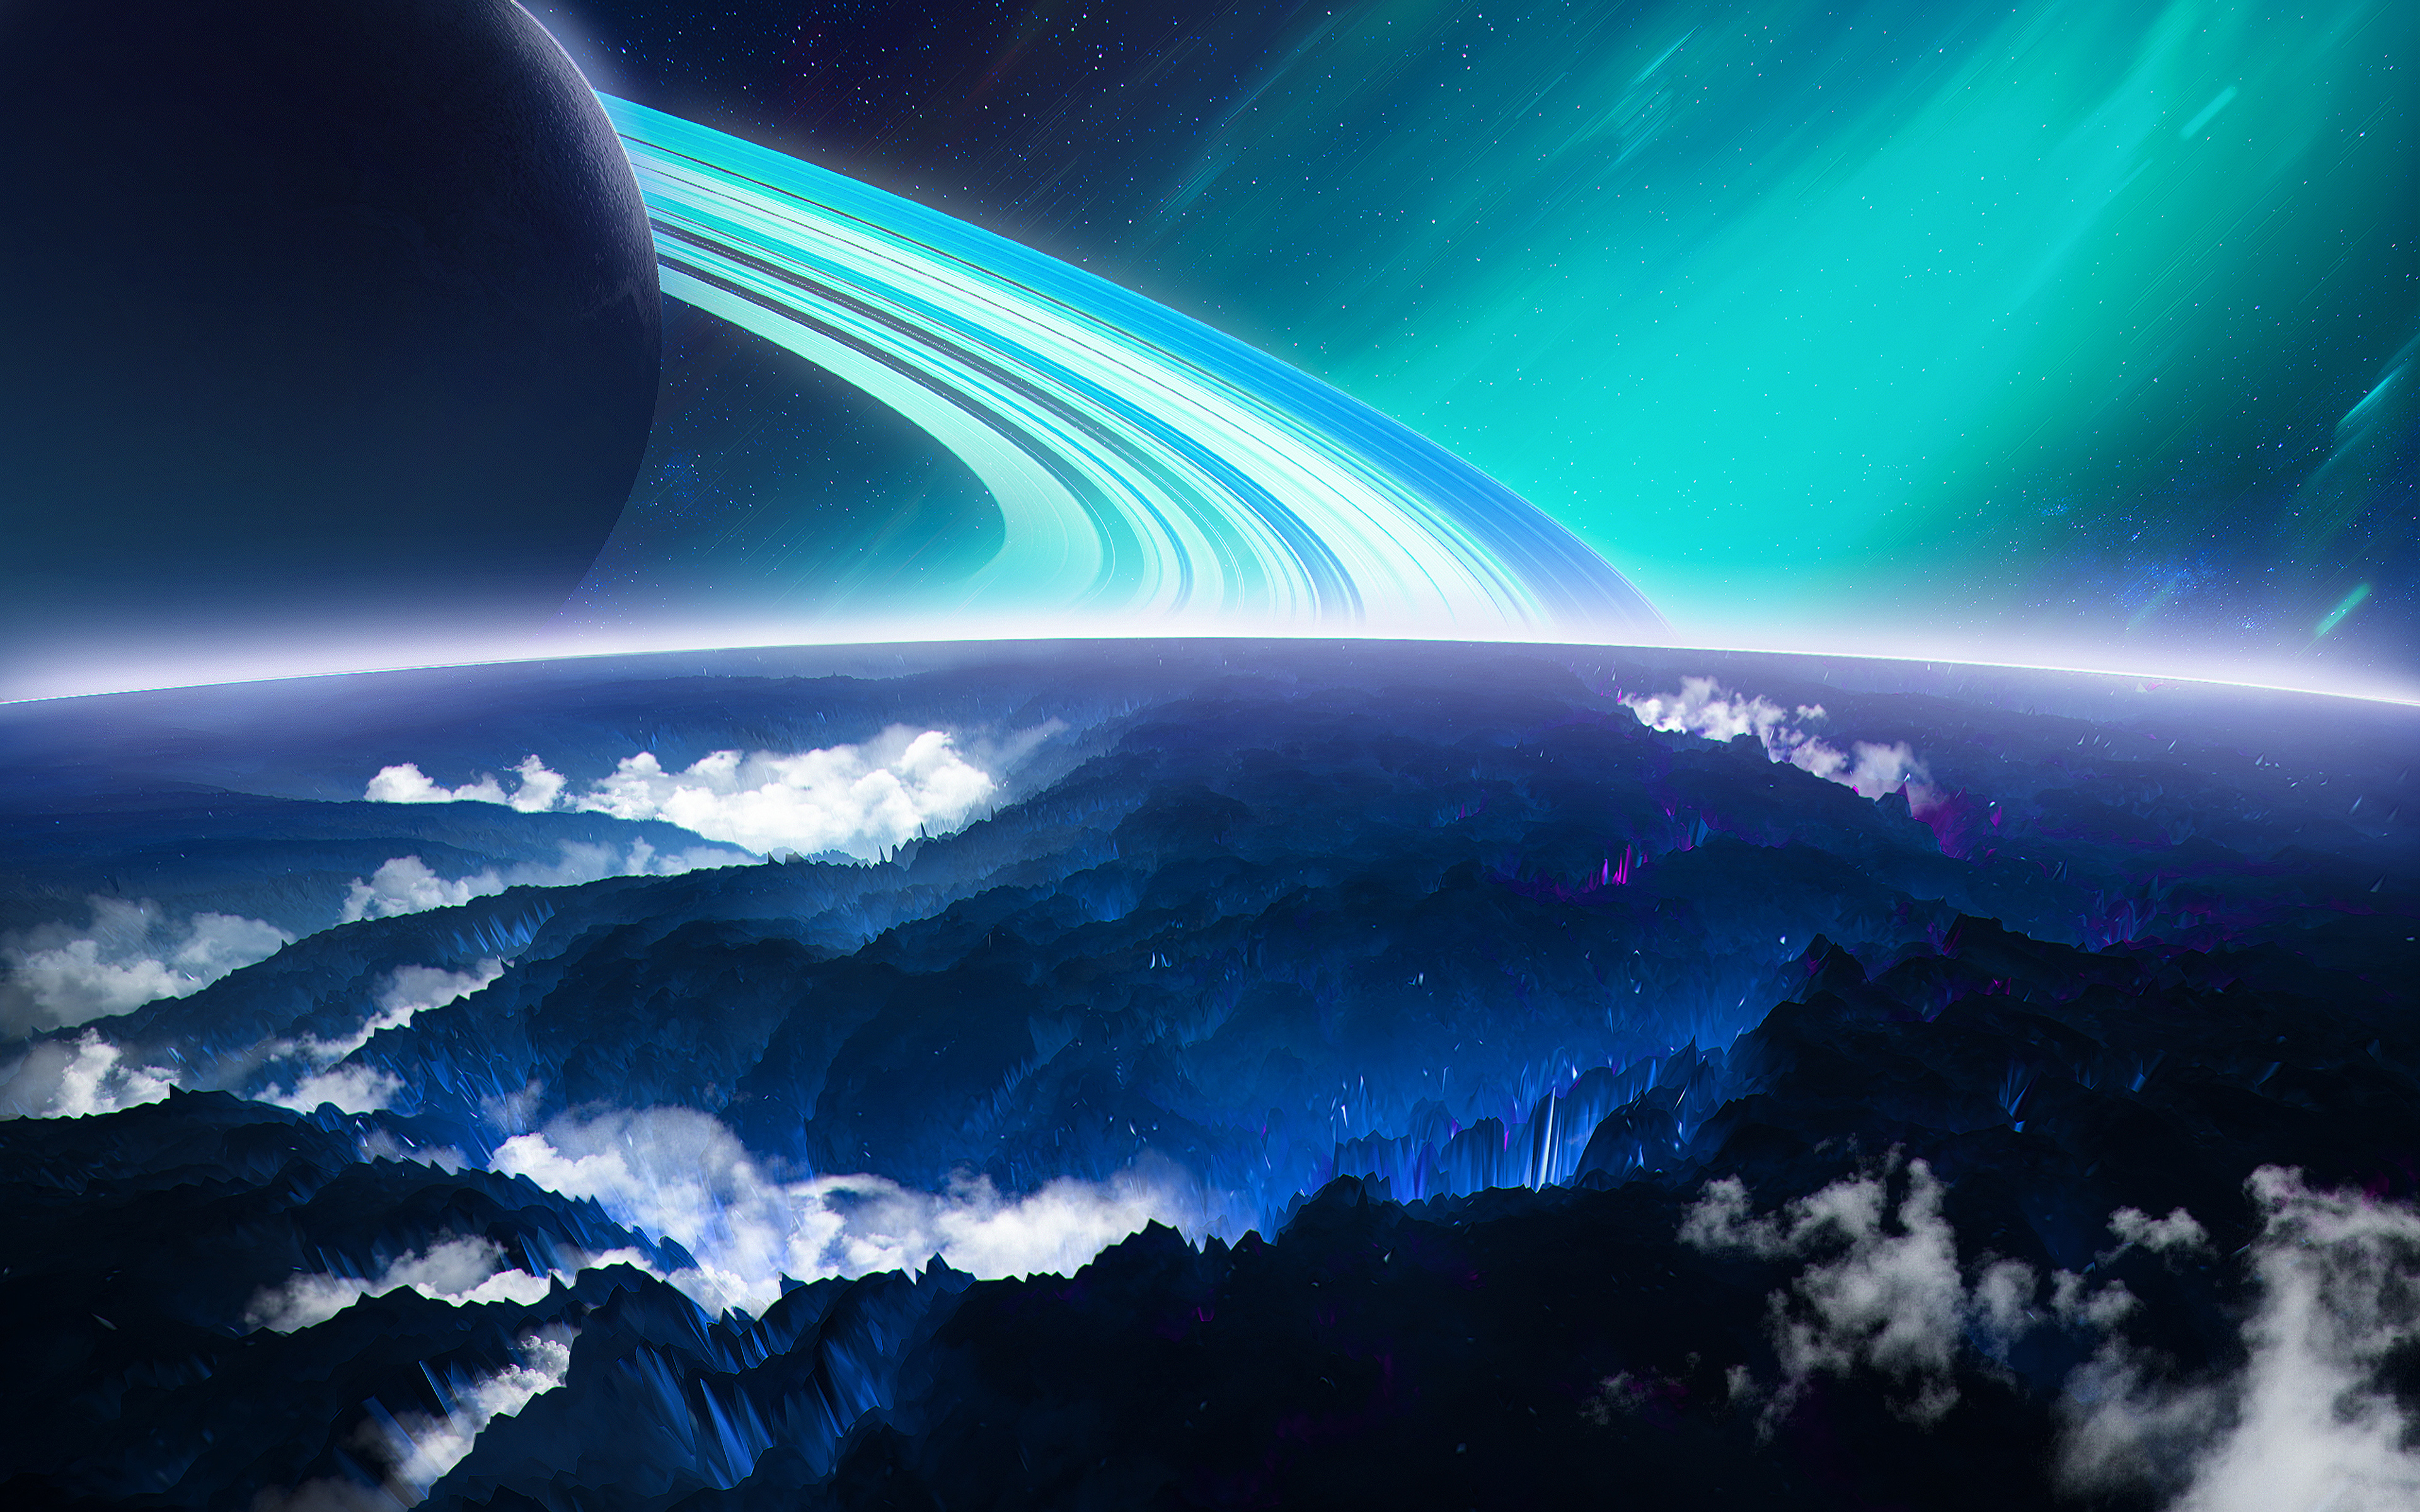 Rising Cosmos 4k, HD Artist, 4k Wallpaper, Image, Background, Photo and Picture